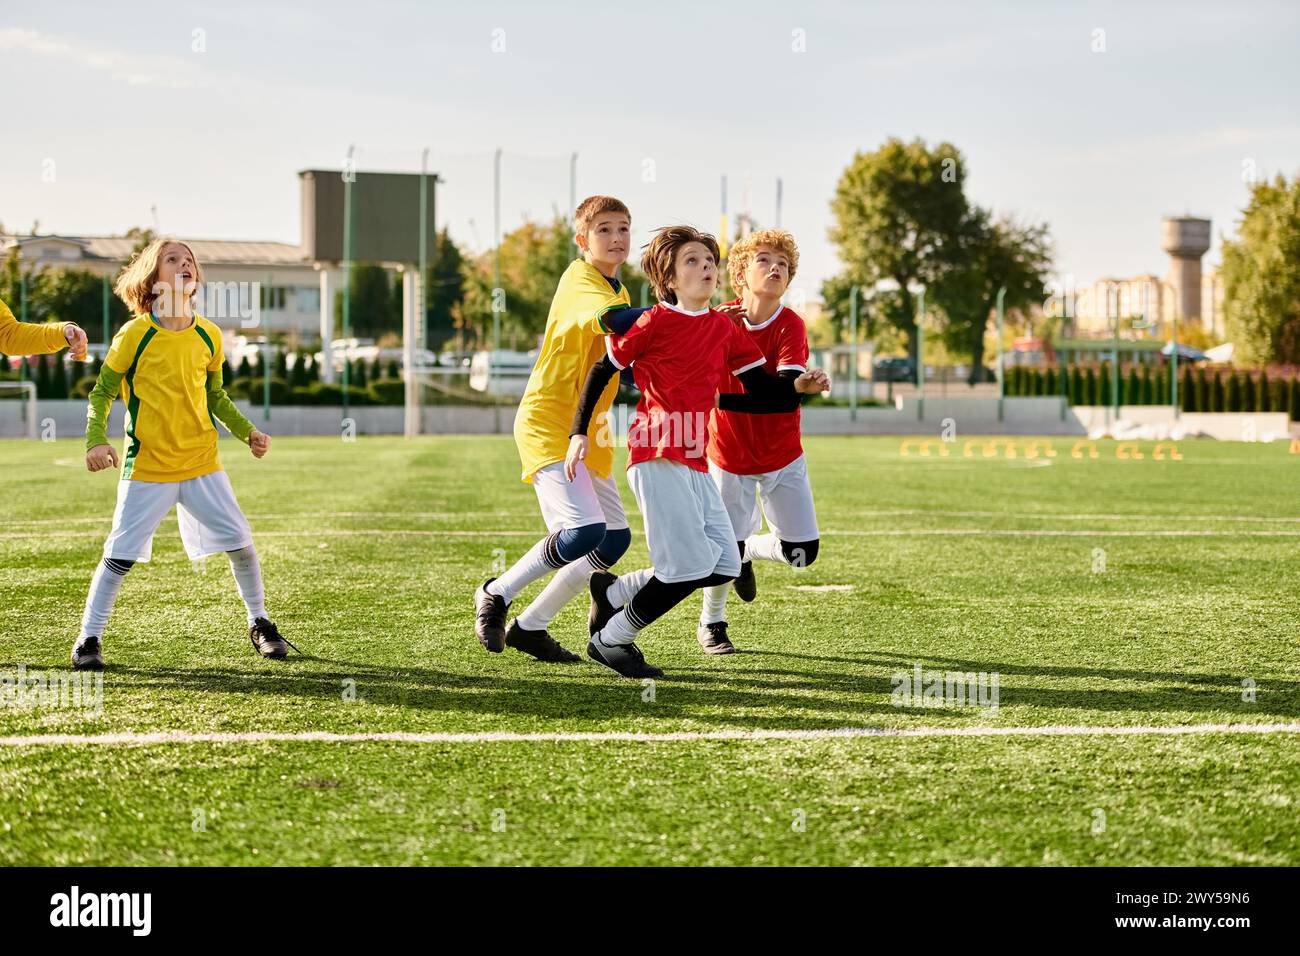 A vibrant scene unfolds as a group of energetic young children engage in a game of soccer on a grassy field. Dressed in colorful jerseys, they dribble Stock Photo